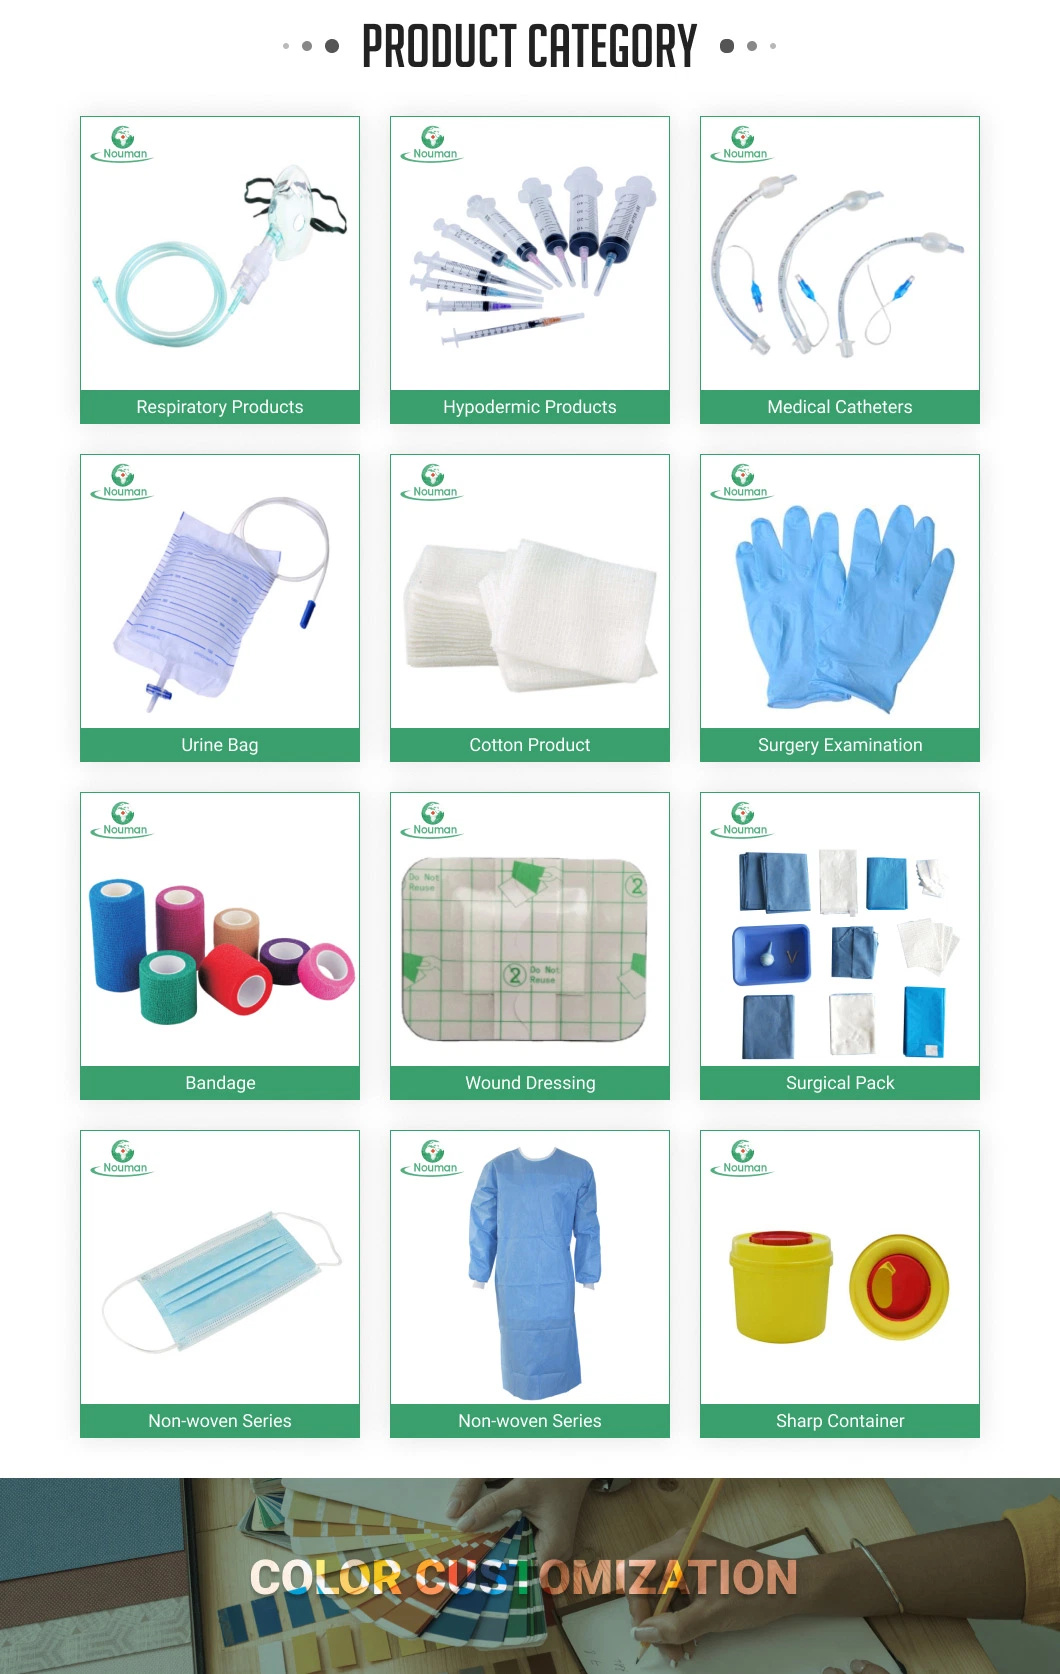 100% Green Blue Medical Disposable O. R Cloth Face Towel Cotton Plain for Hospital Square Adult